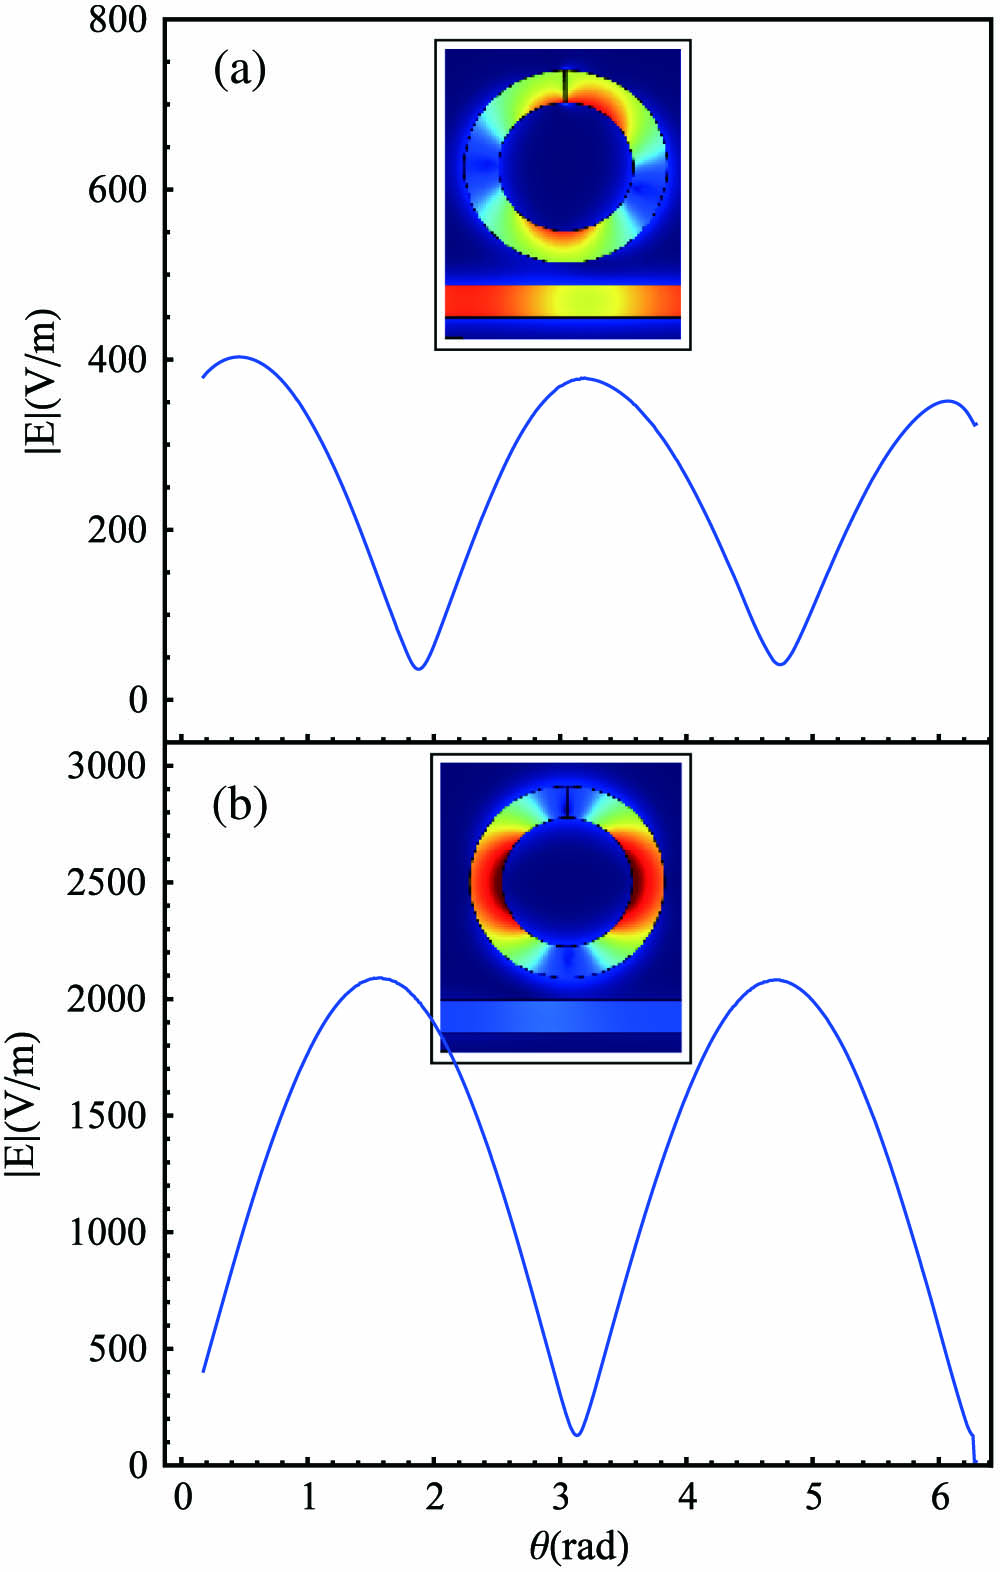 Electric field distribution of the input field with wavelength (a) 982 and (b) 1081 nm. Here we take the gap as the origin point and rotate around the ring resonator CCW with an angle of 2π. The inset figure shows the field magnitude of the electric field.